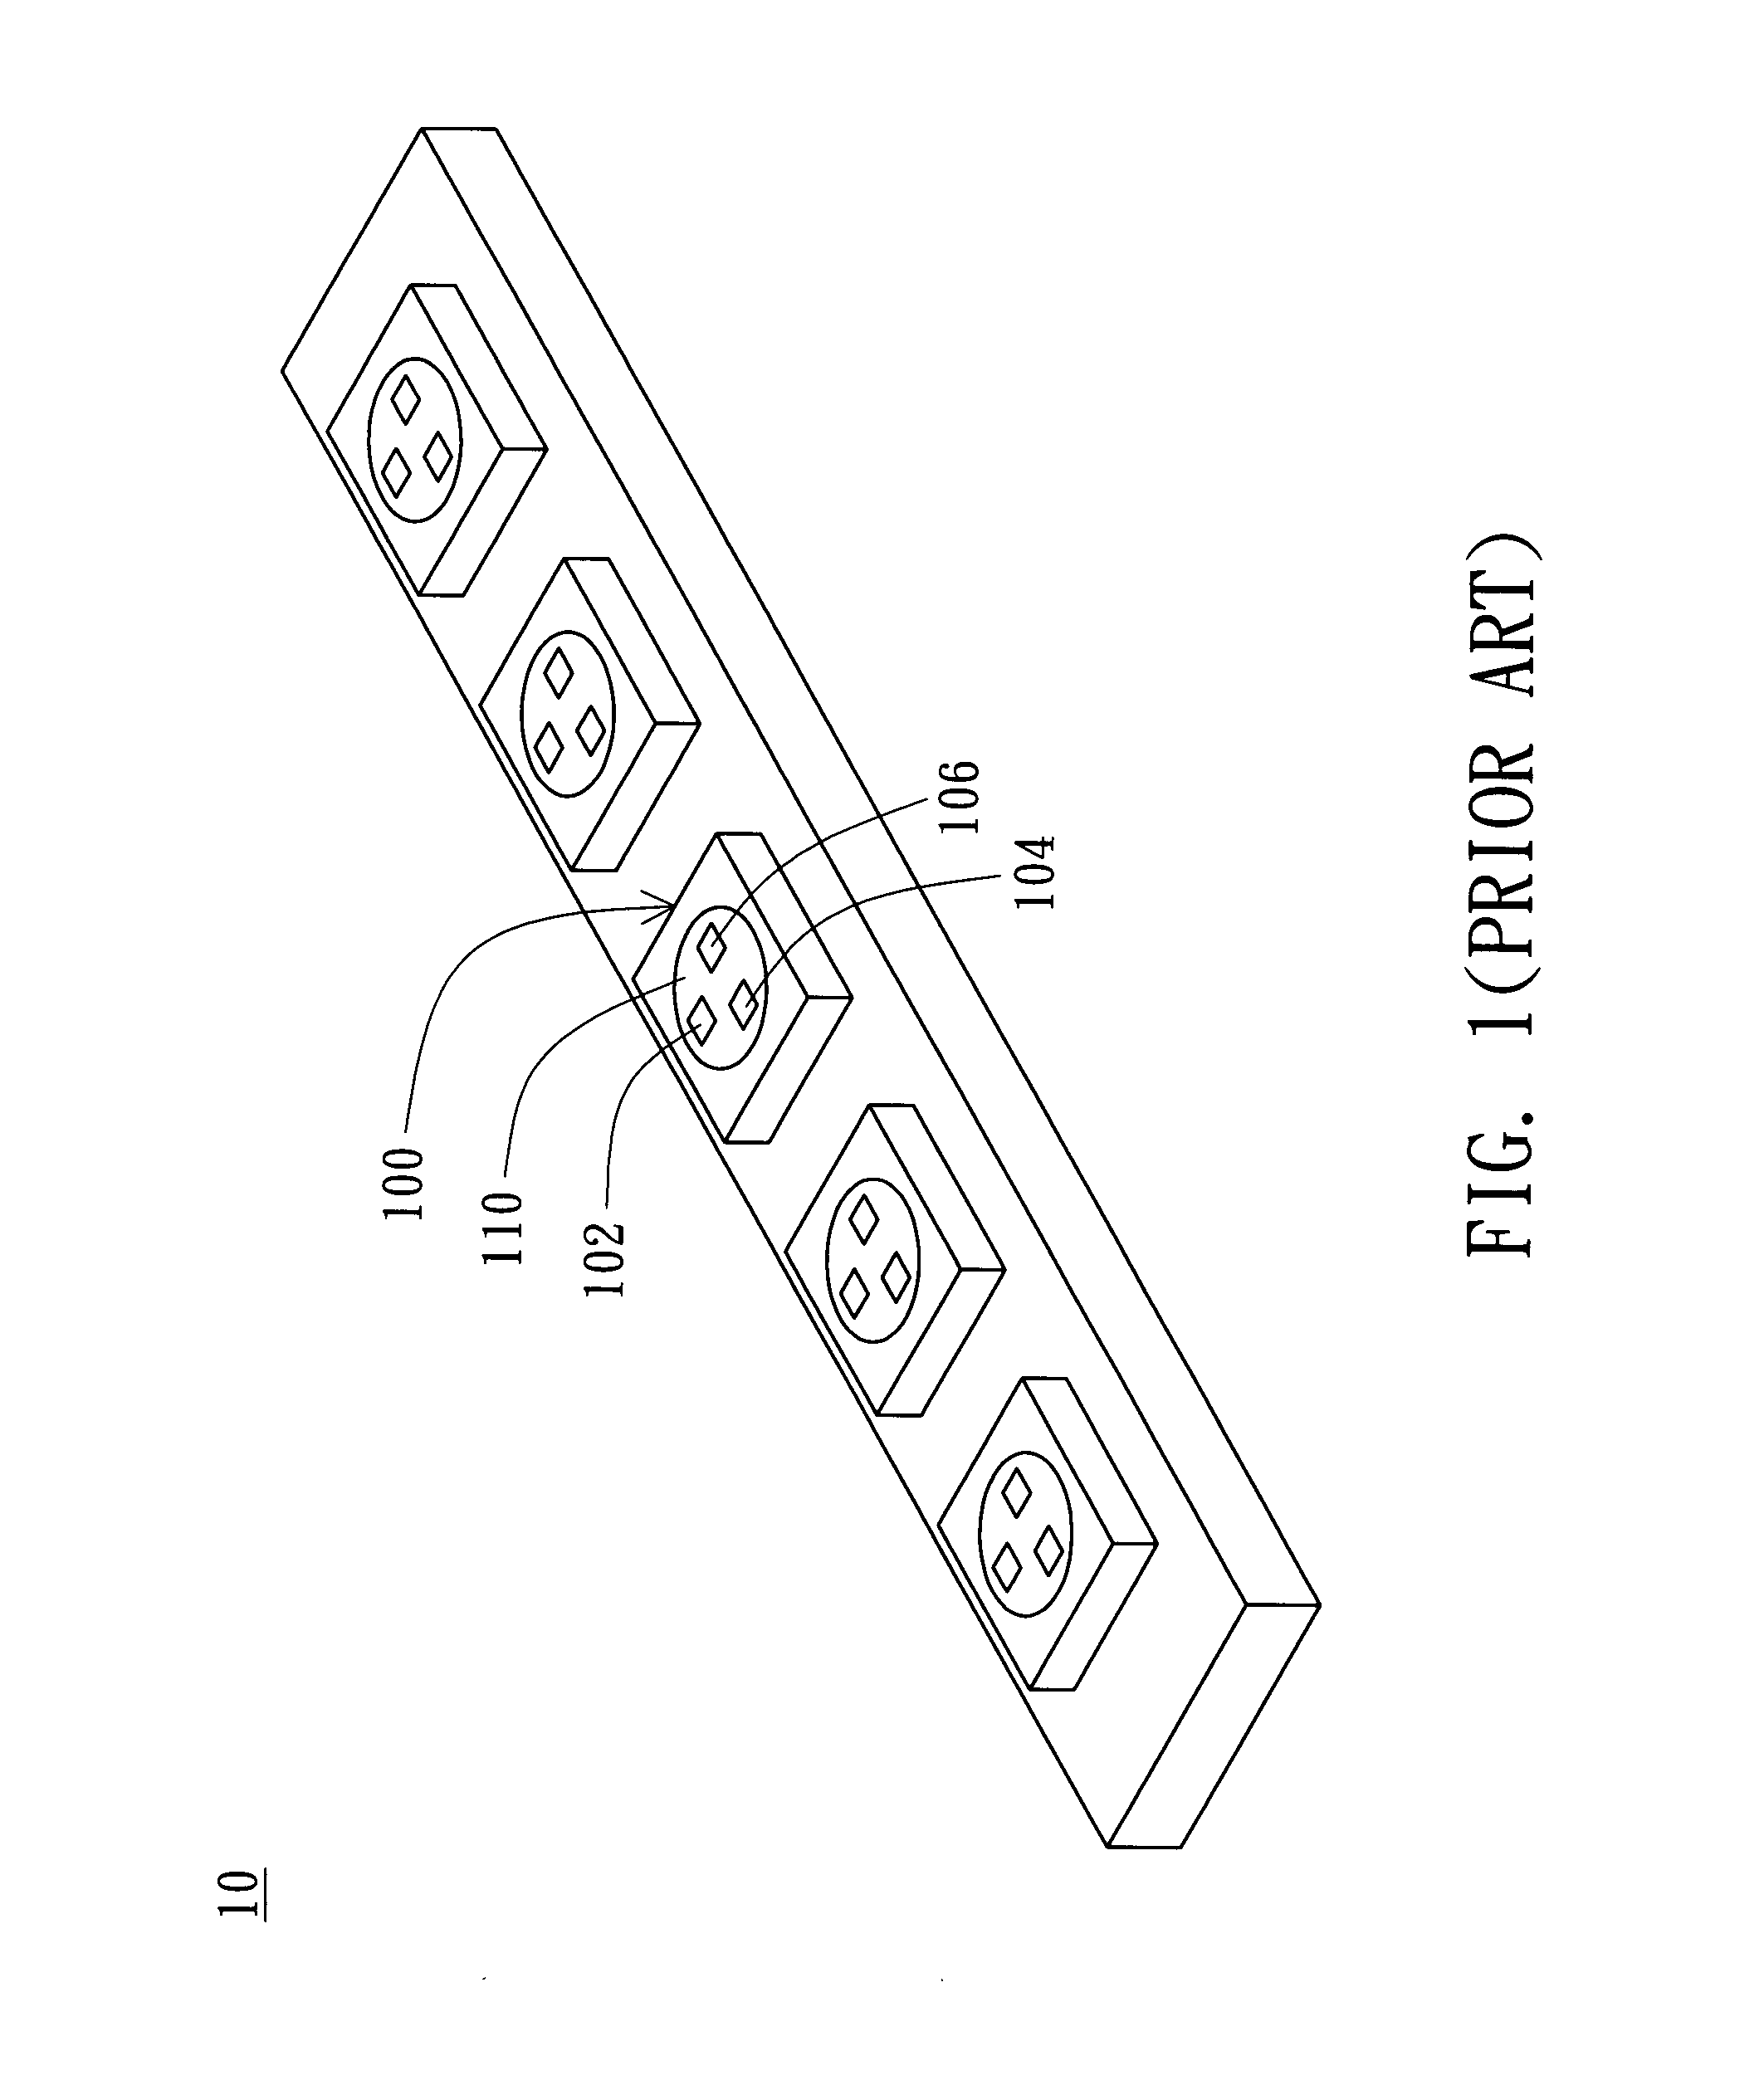 Light device with a color mixing effect